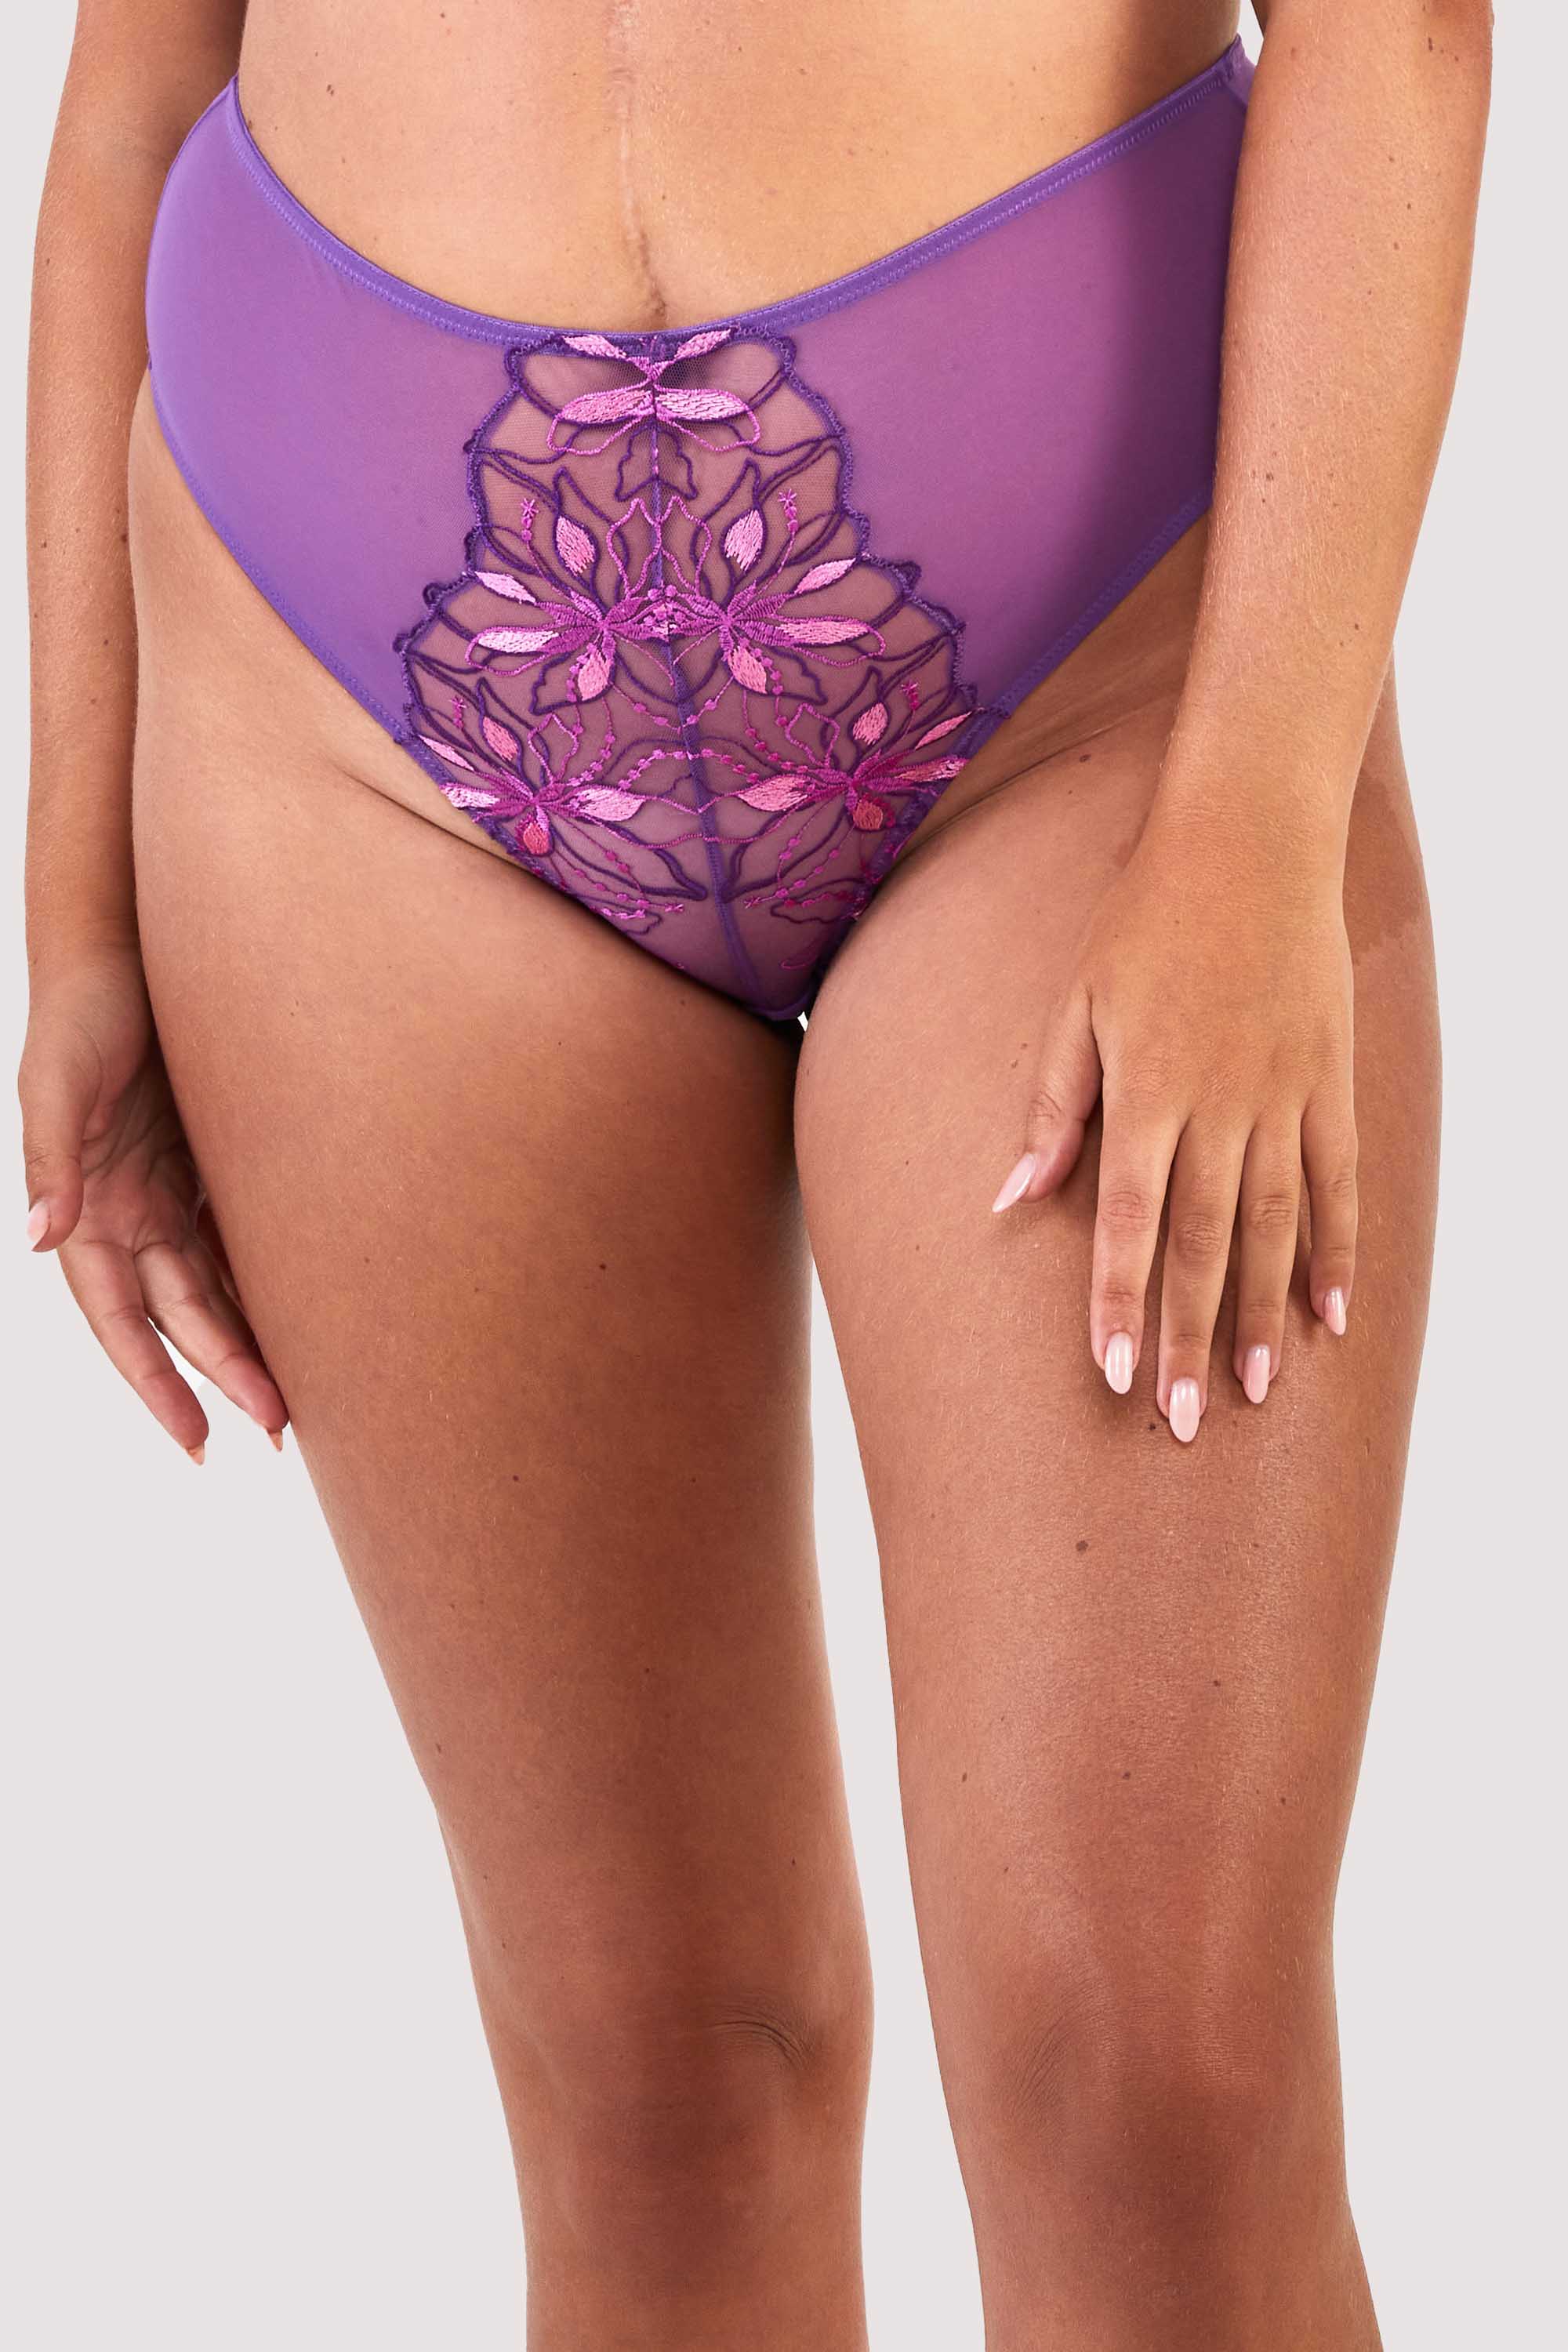 Mesh purple thong with an embroidered pink and purple panel in the front, worn with a matching bra.